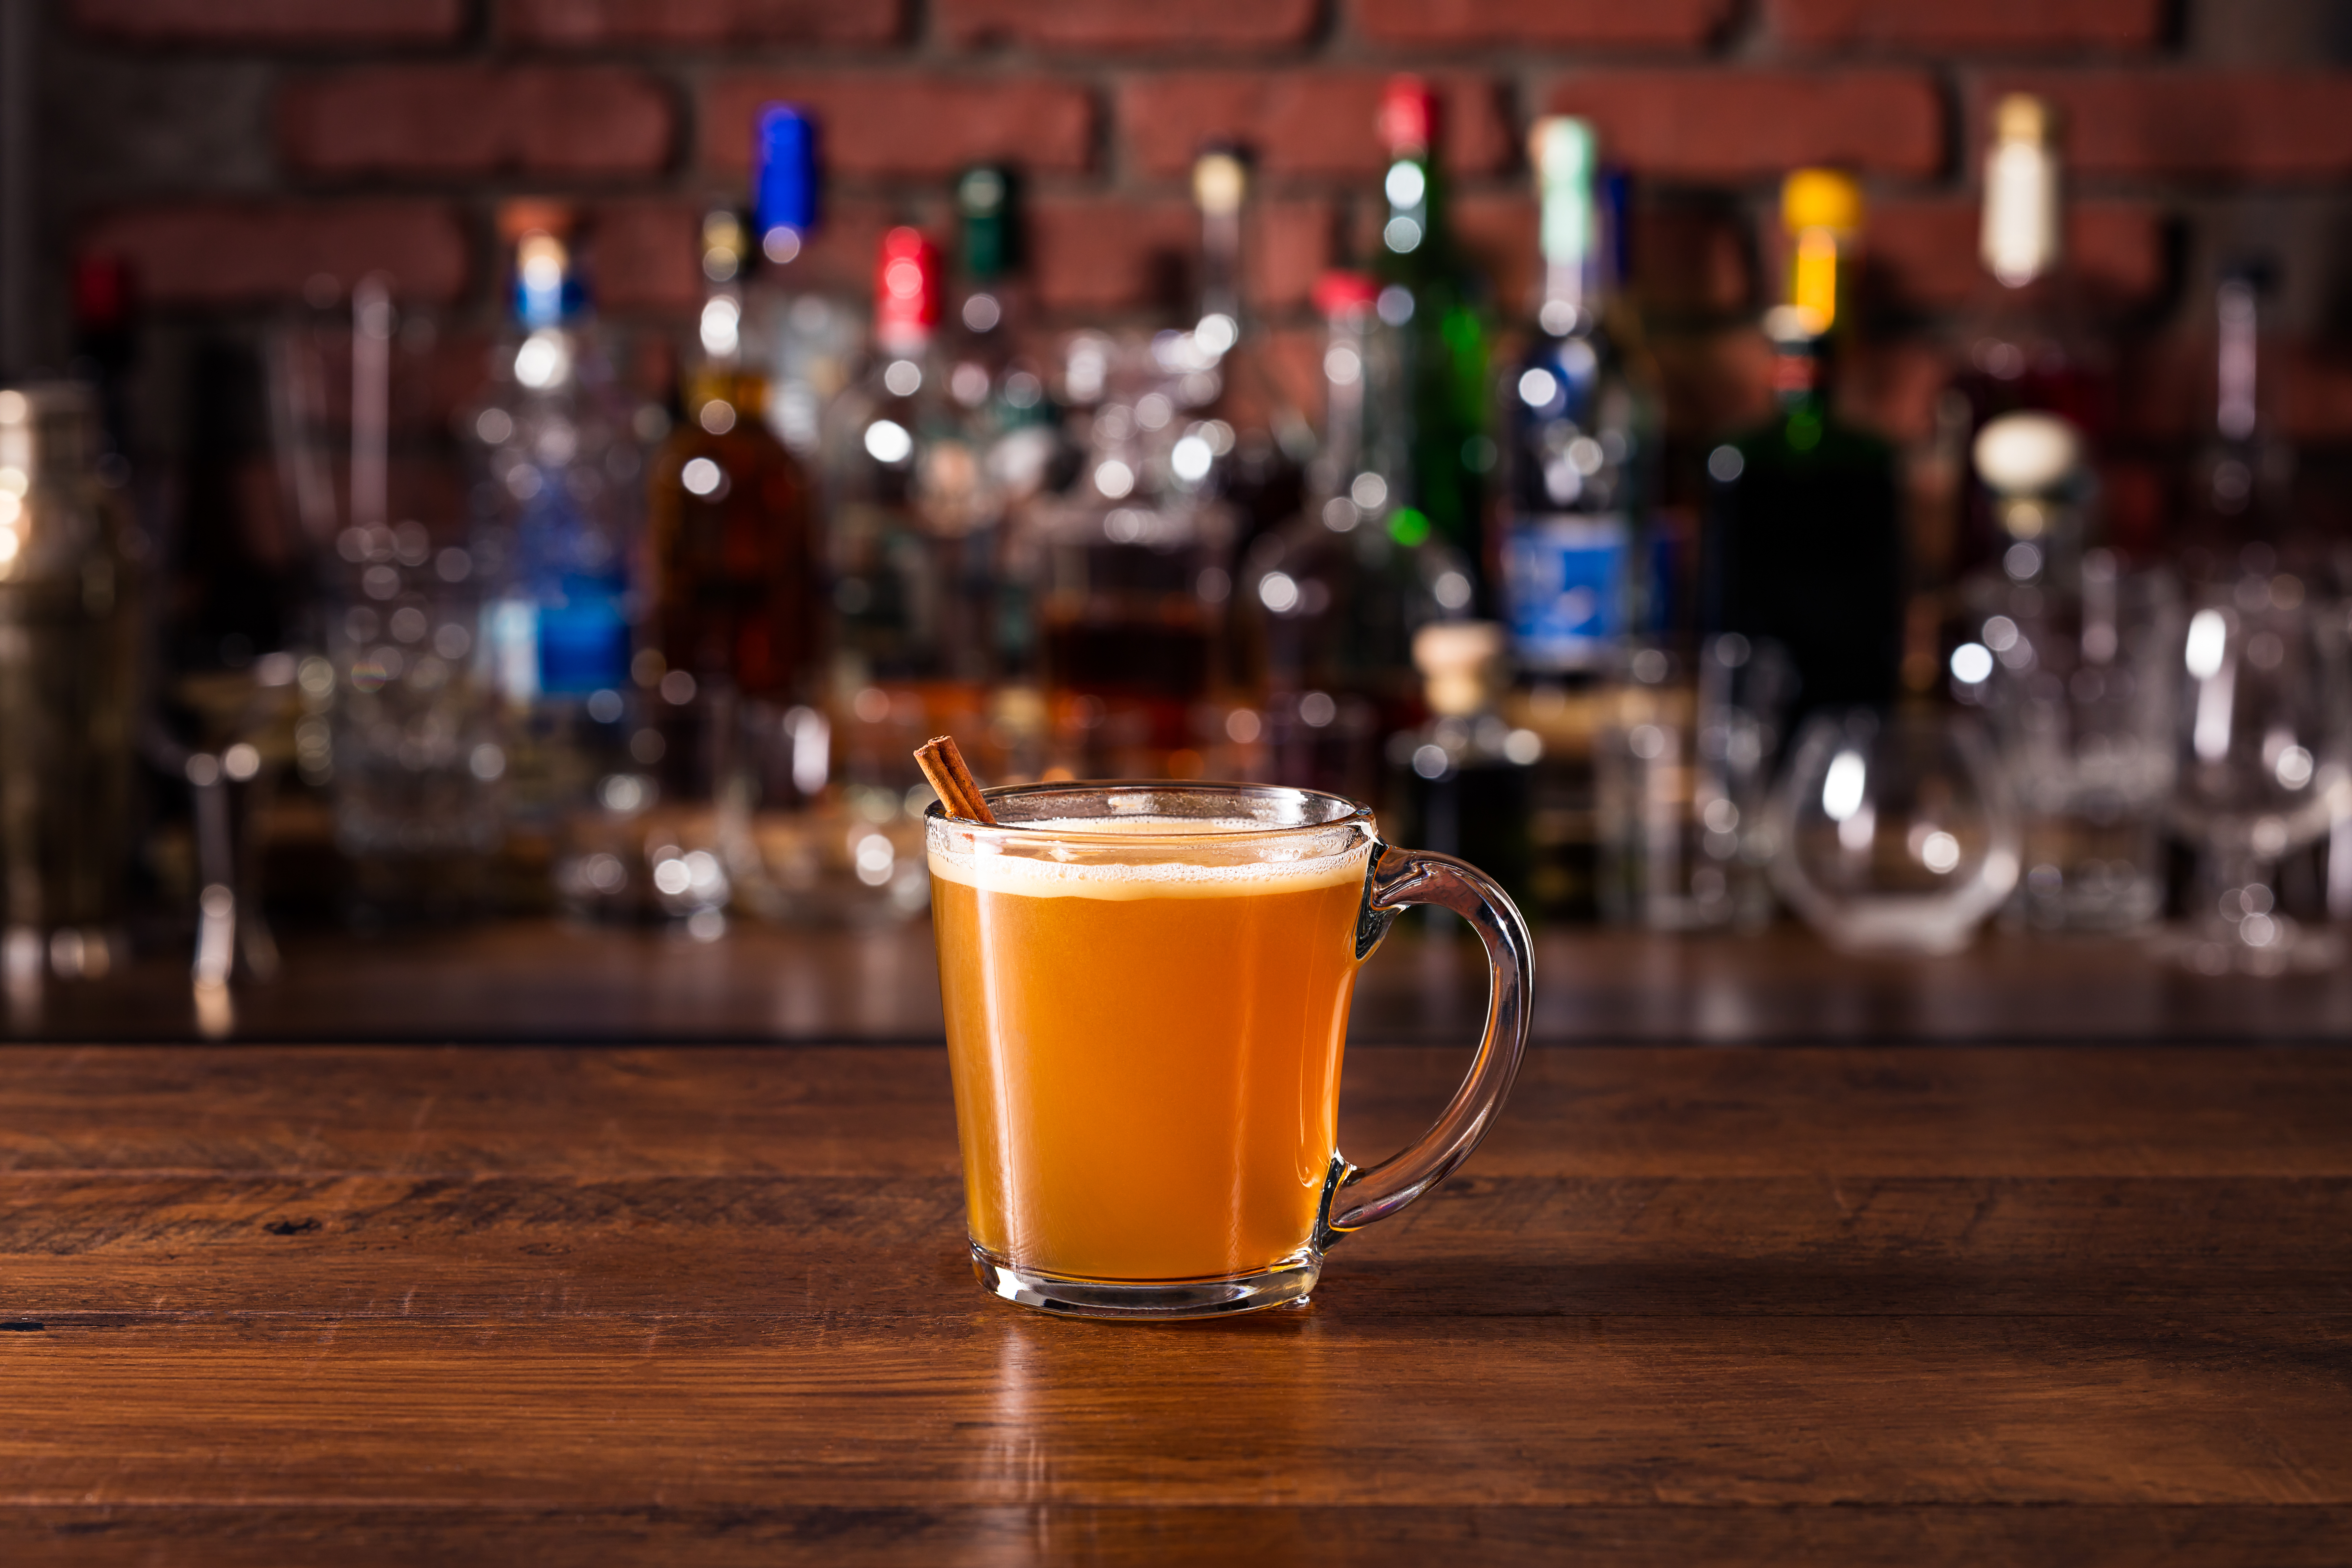 Warm Whiskey Hot Buttered Rum on a bar with various alcohol bottles in the background